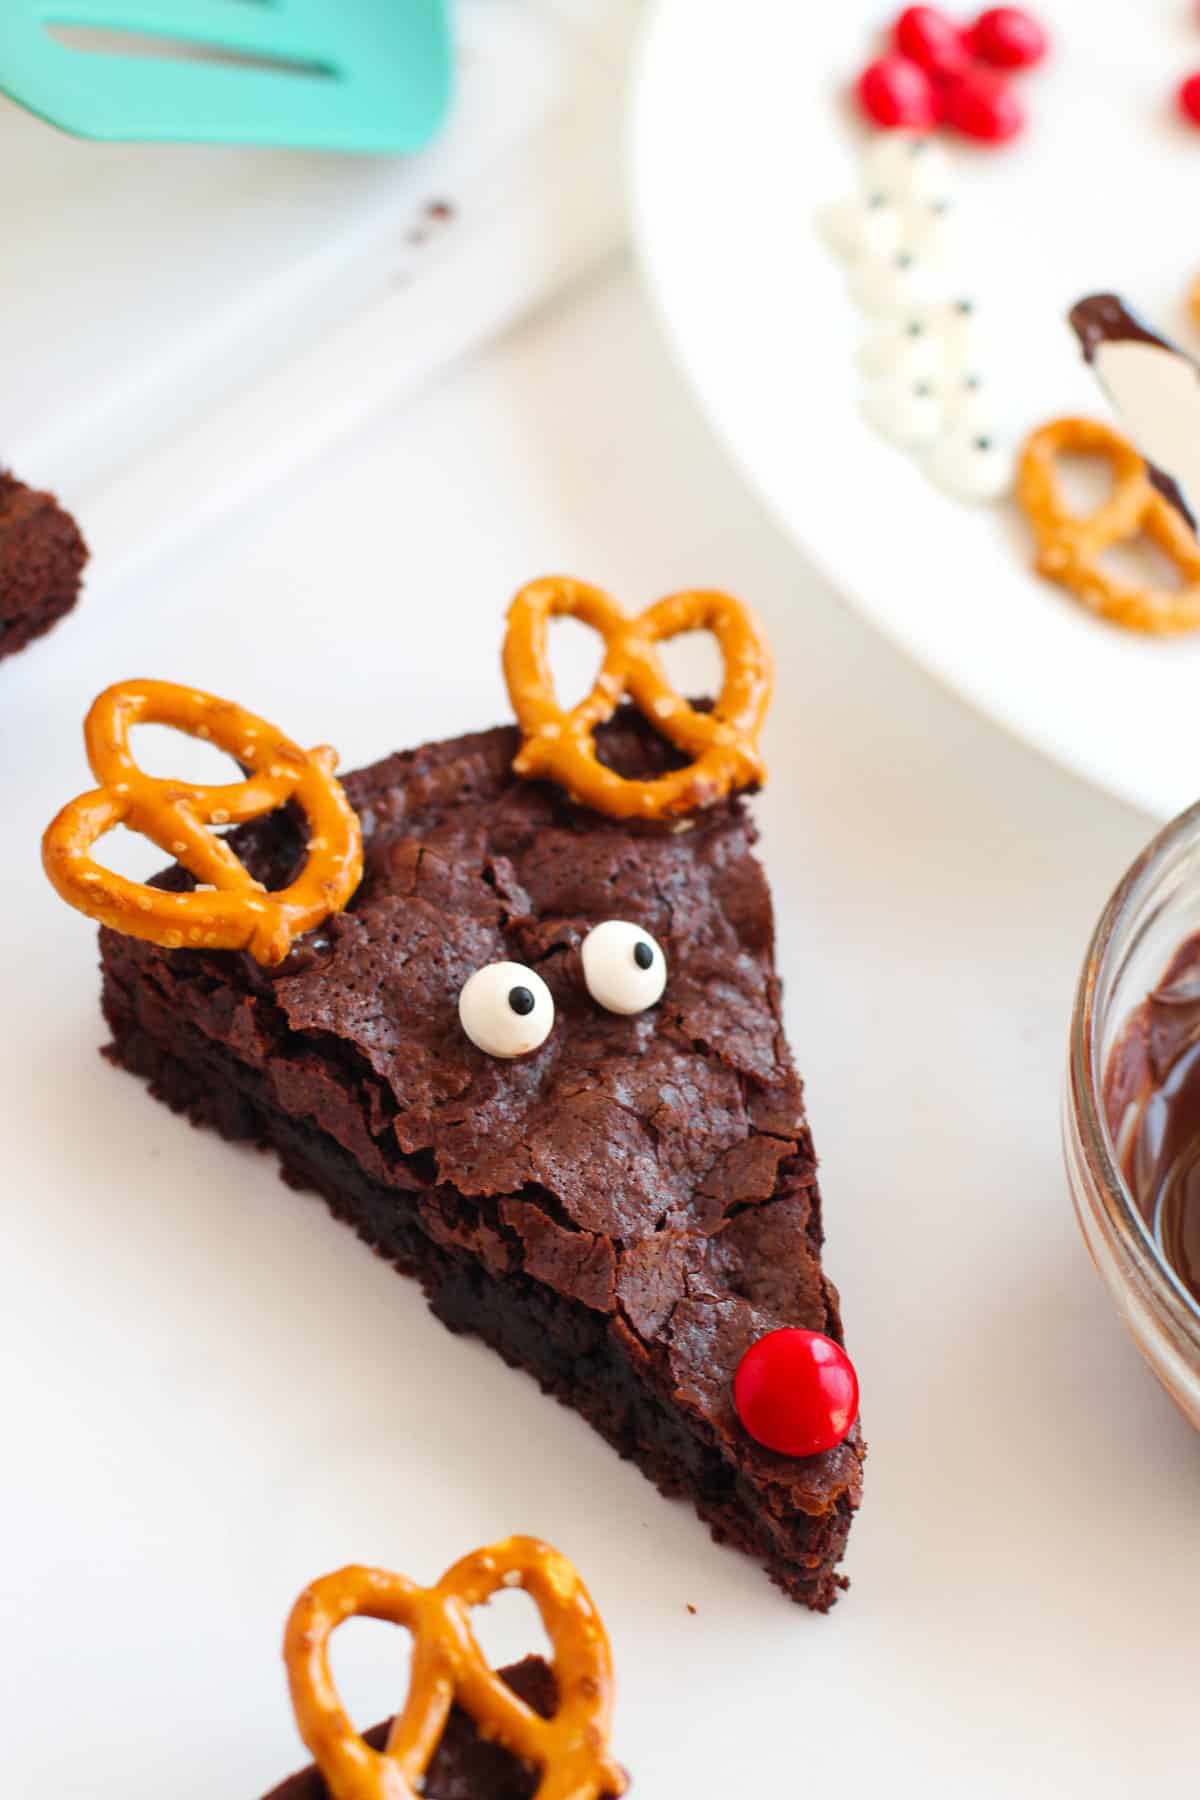 Pretzel twists, candy eyes, and red chocolate candy on brownie to make a reindeer face.